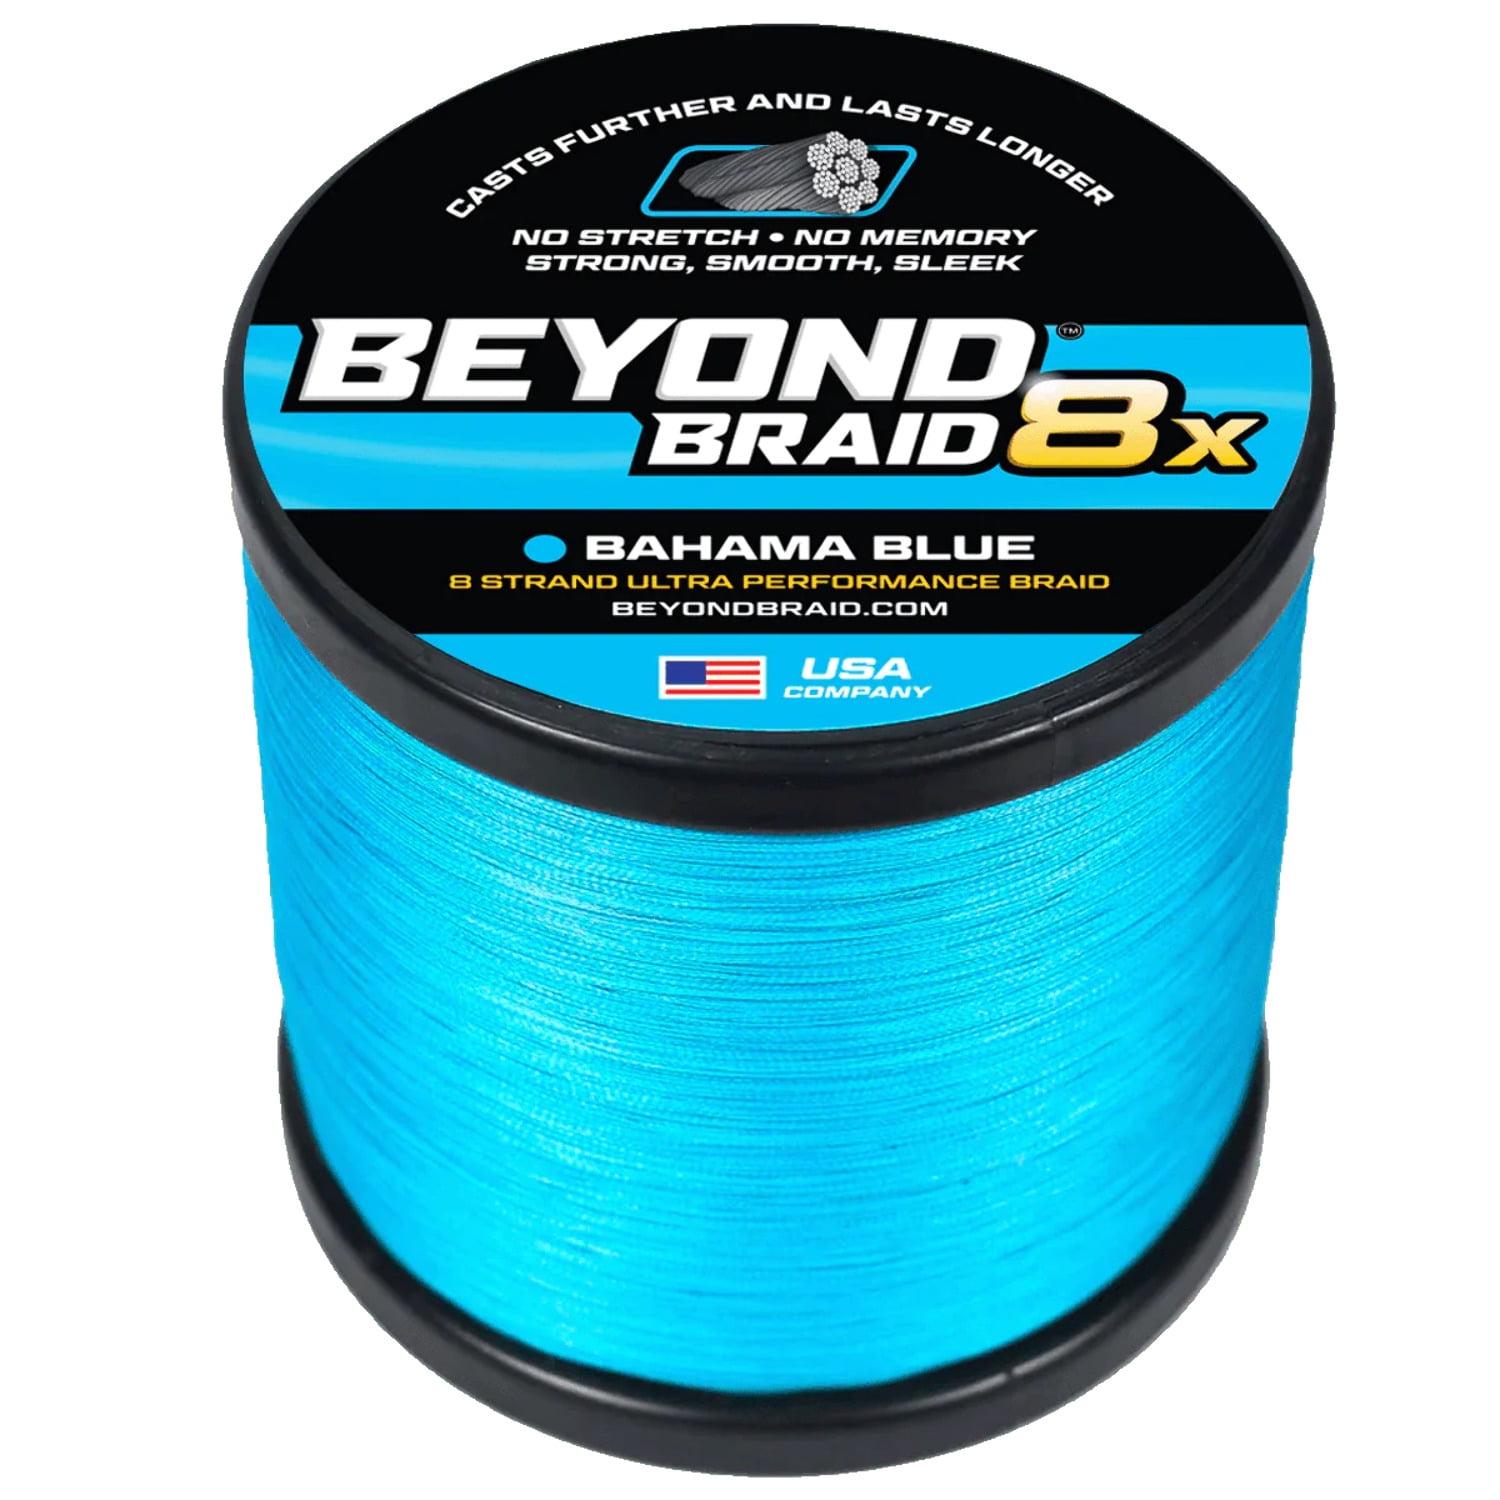 Mccoy Super Spectra Braid Mean Green Premium Tight Weave Braided Fishing Line (4lb Test (< .005 inch Dia) - 300 Yards), Size: 4lb Test (< .005 Dia) 